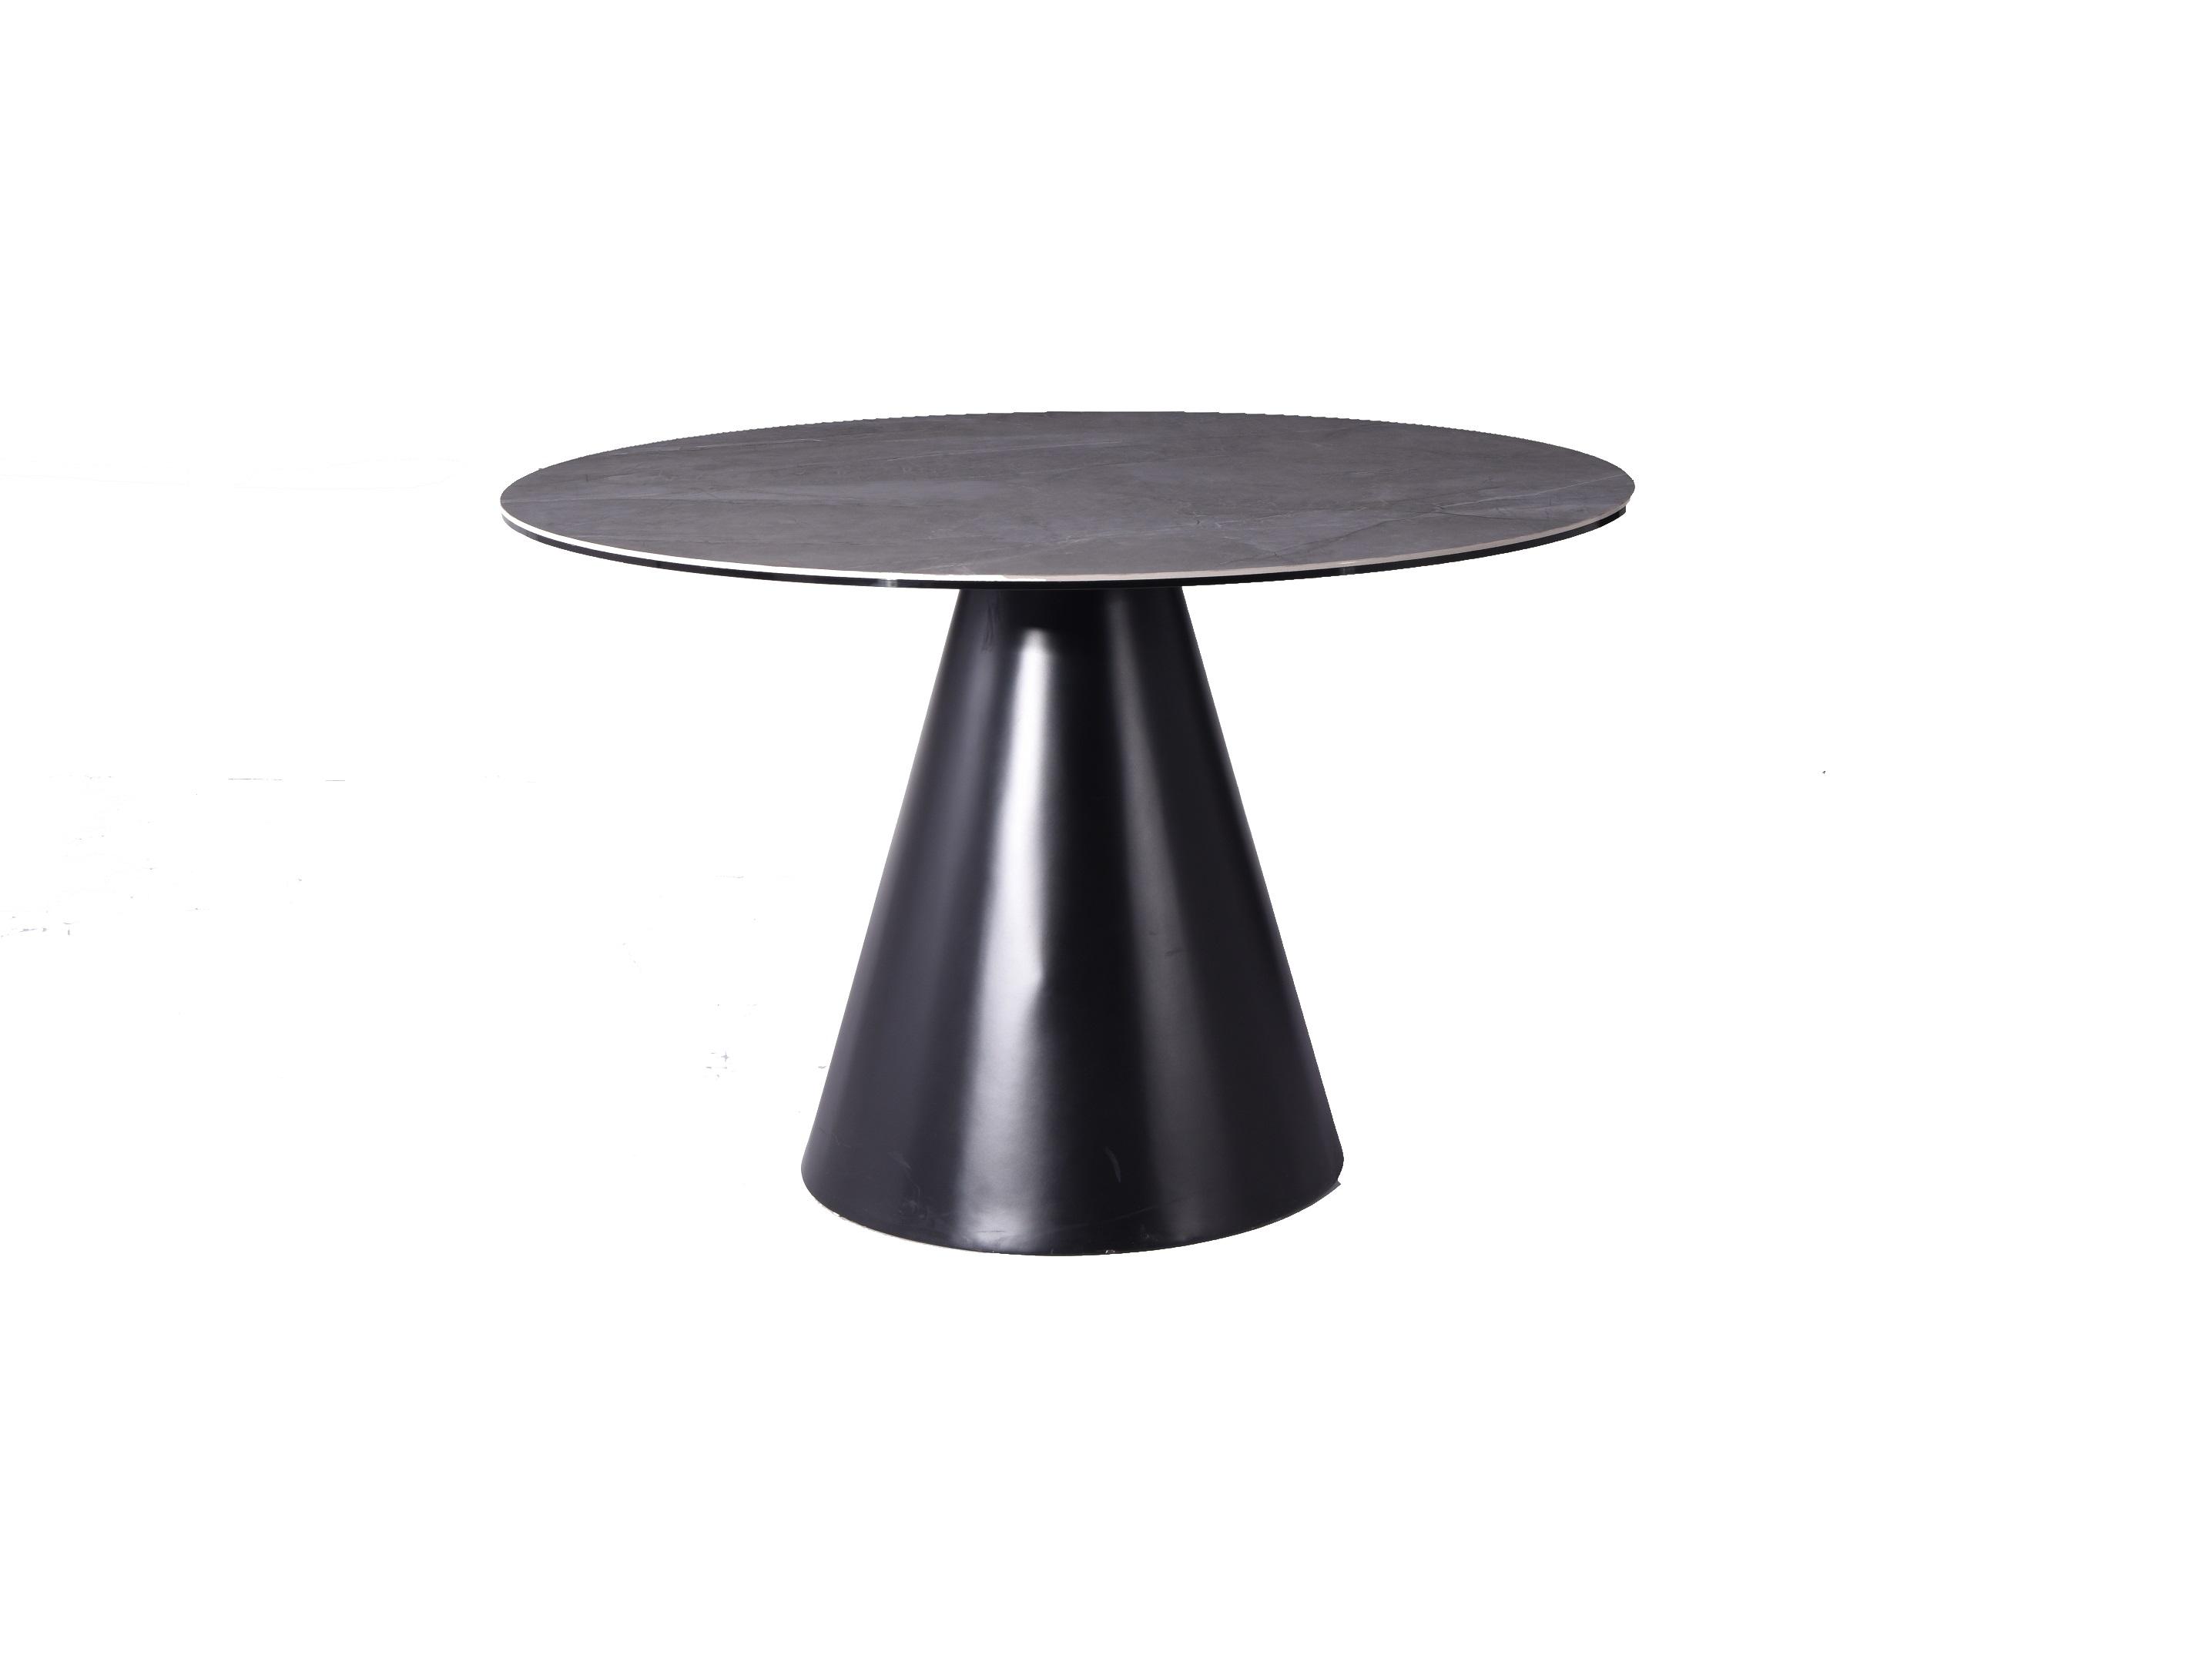 Modern Dining Table DT1638R-BLK/GRY Sun DT1638R-BLK/GRY in Black 